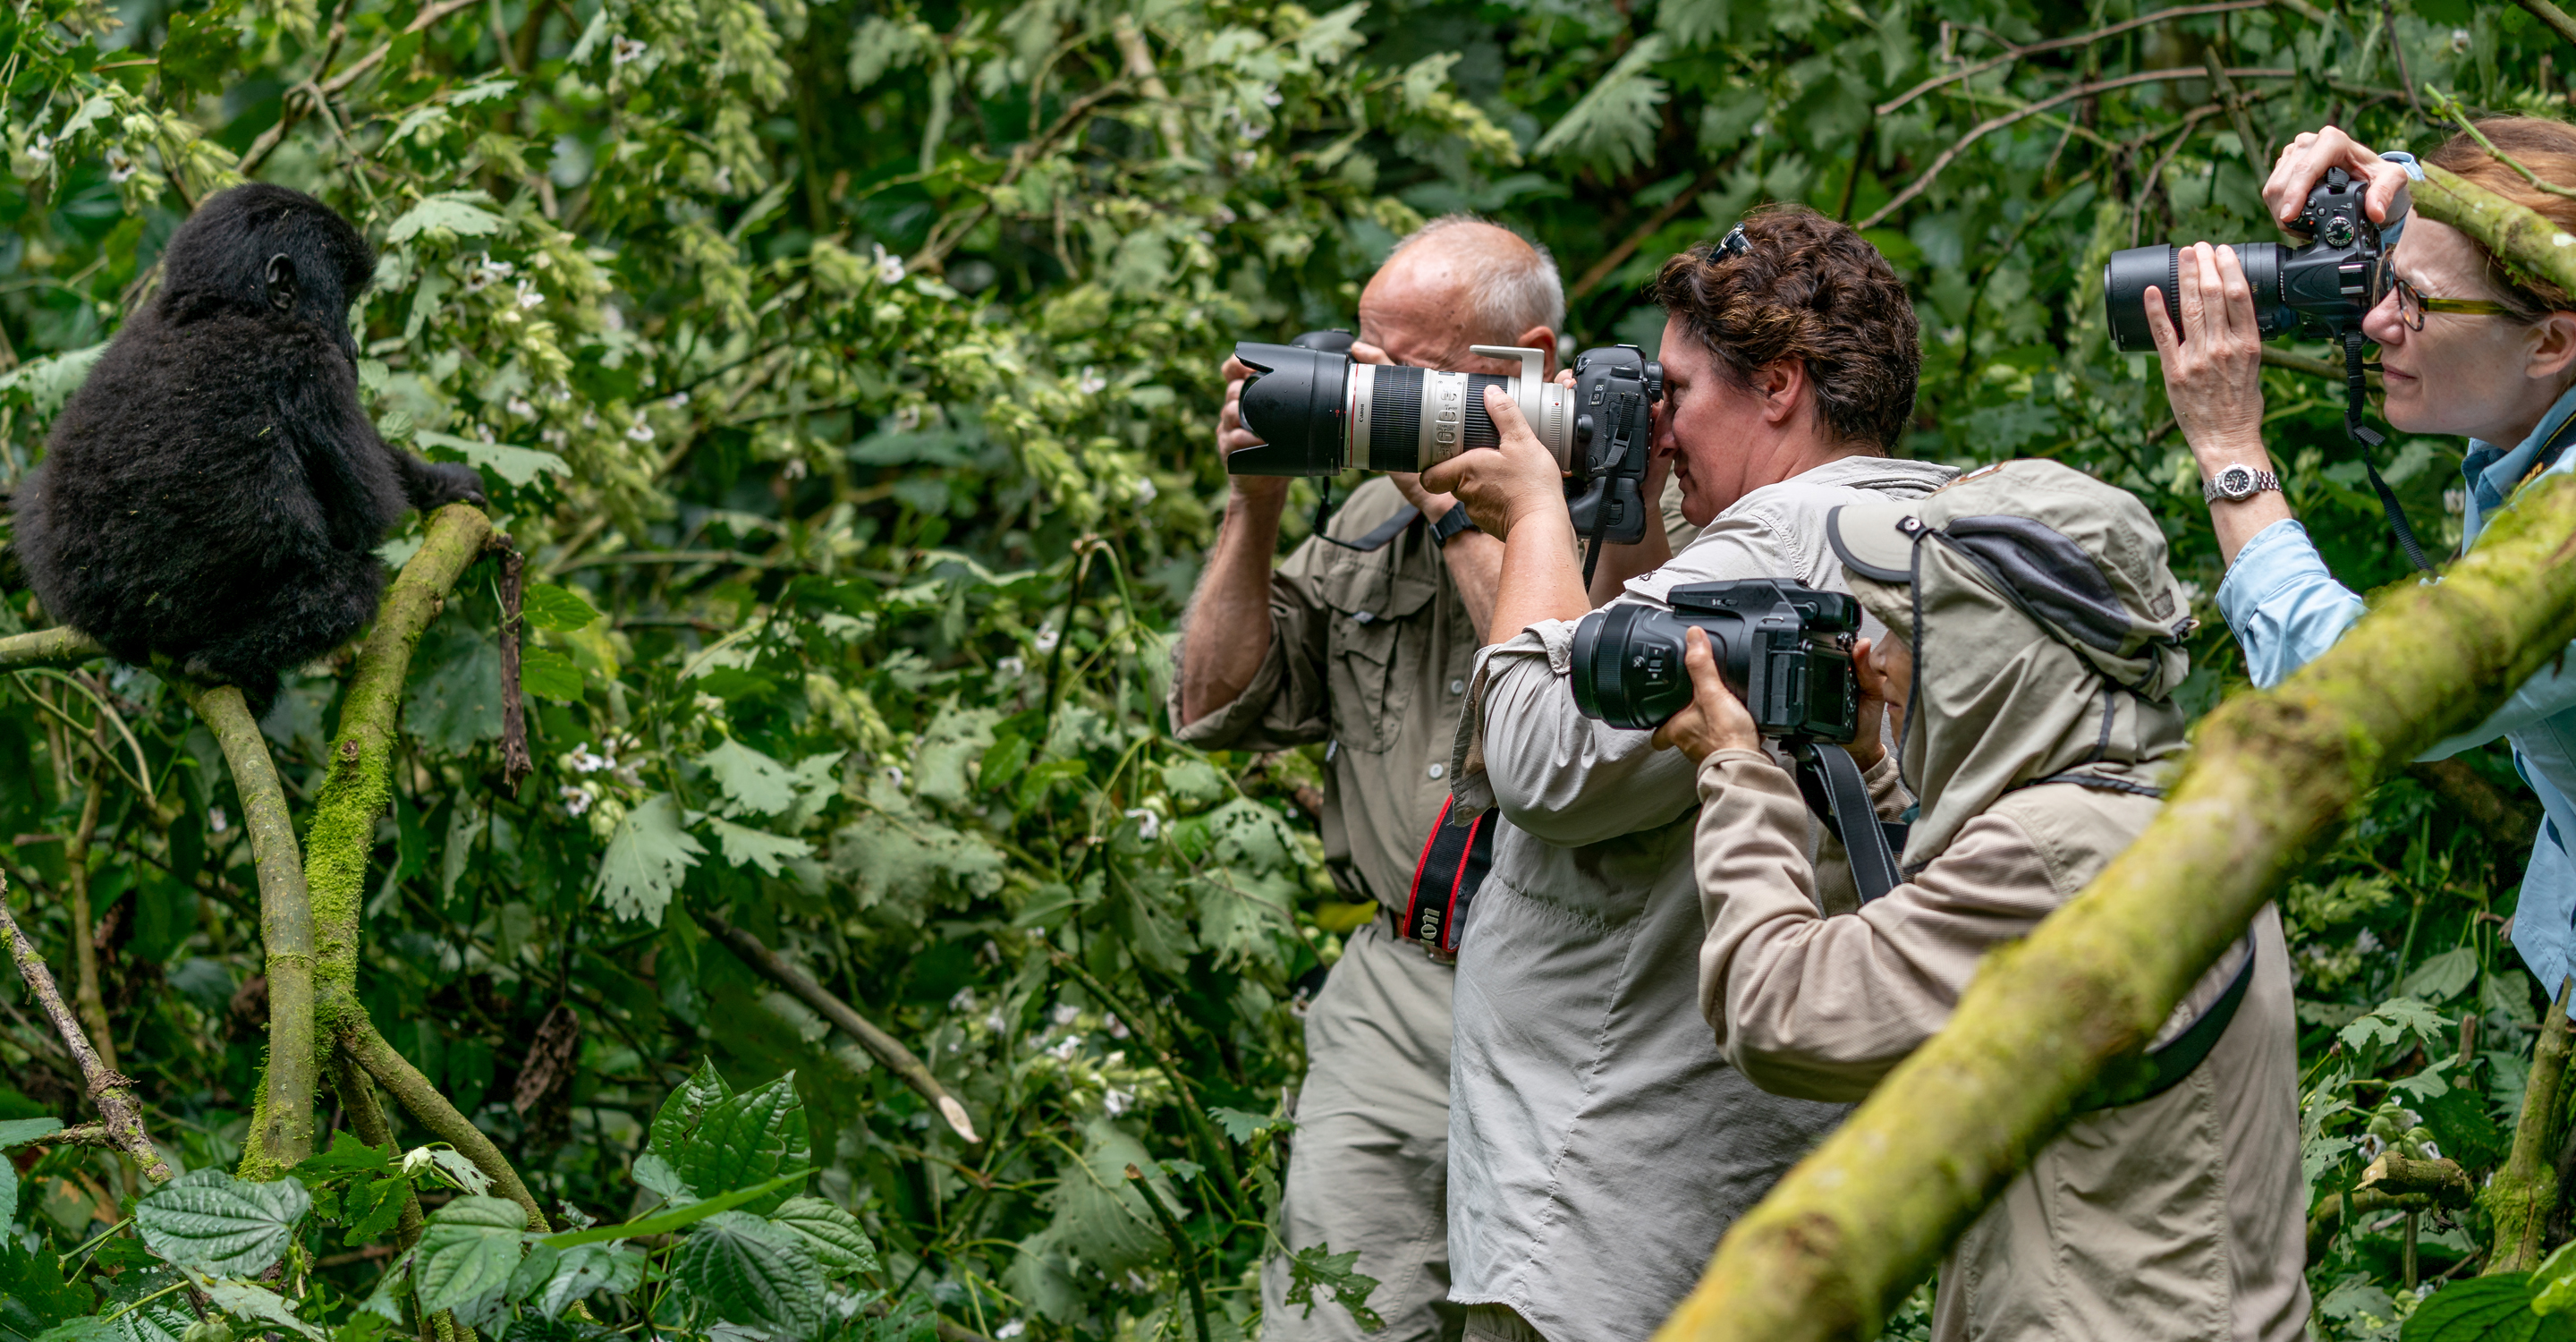 Photographers get an up-close encounter with a baby mountain gorilla in Bwindi Impenetrable National Park, Uganda